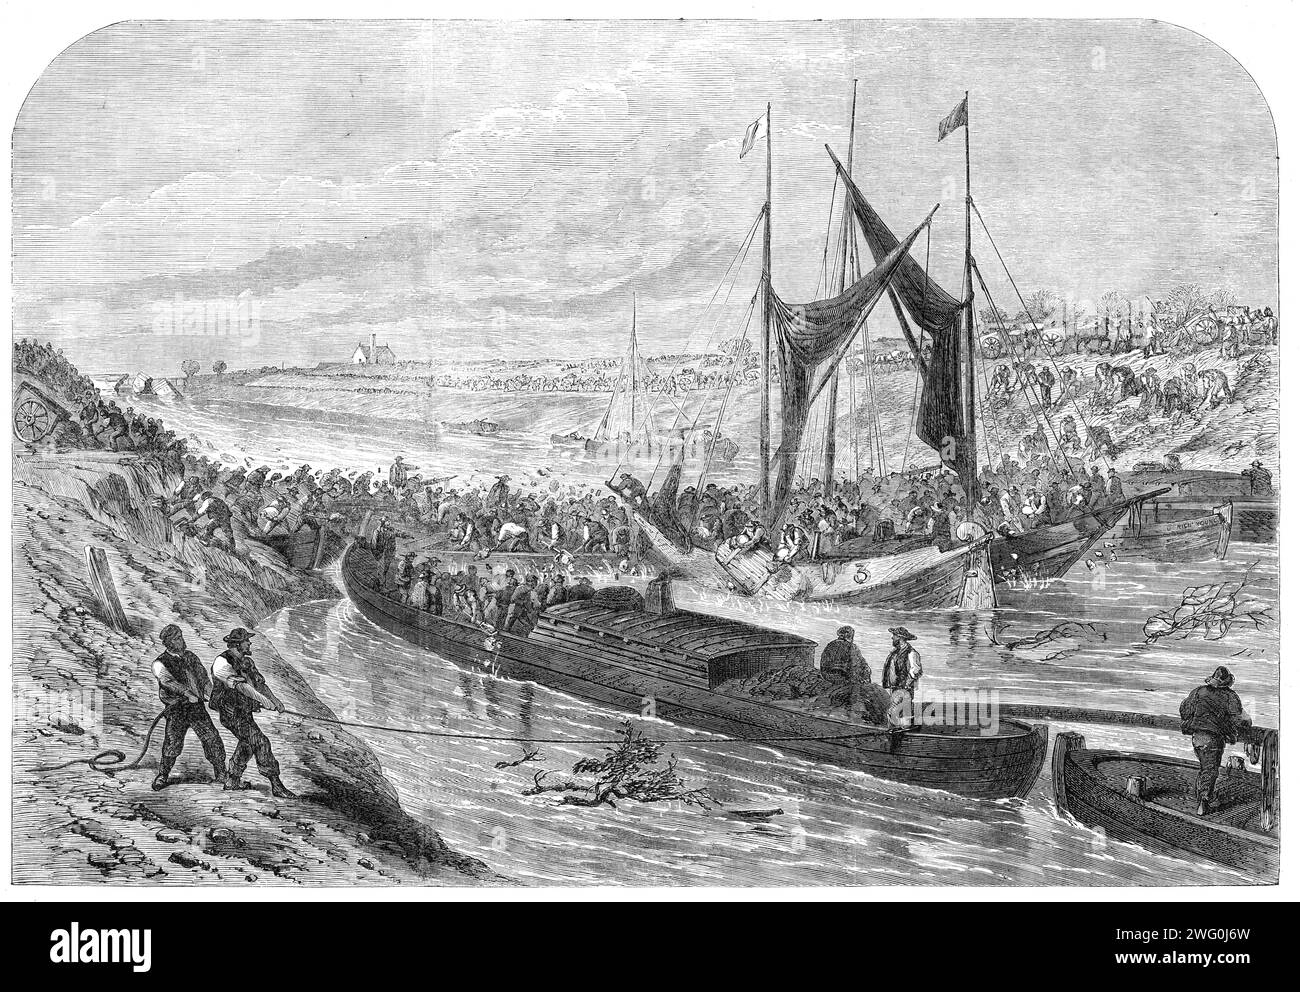 The Great Flood in the Fens: attempt to form a dam in the middle-level drain, 1862. 'The destruction of the sluice connected with the Middle-Level outfall...has been attended with the most serious results. Since this sluice gave way a succession of flood tides has poured into the cut, the banks have been unable to withstand the increased pressure, and the waters are flowing out over all the adjacent farms. Every effort has hitherto been in vain...hundreds of workmen have been employed day and night in driving piles and constructing dams, which the first high tide washes away again in a moment. Stock Photo